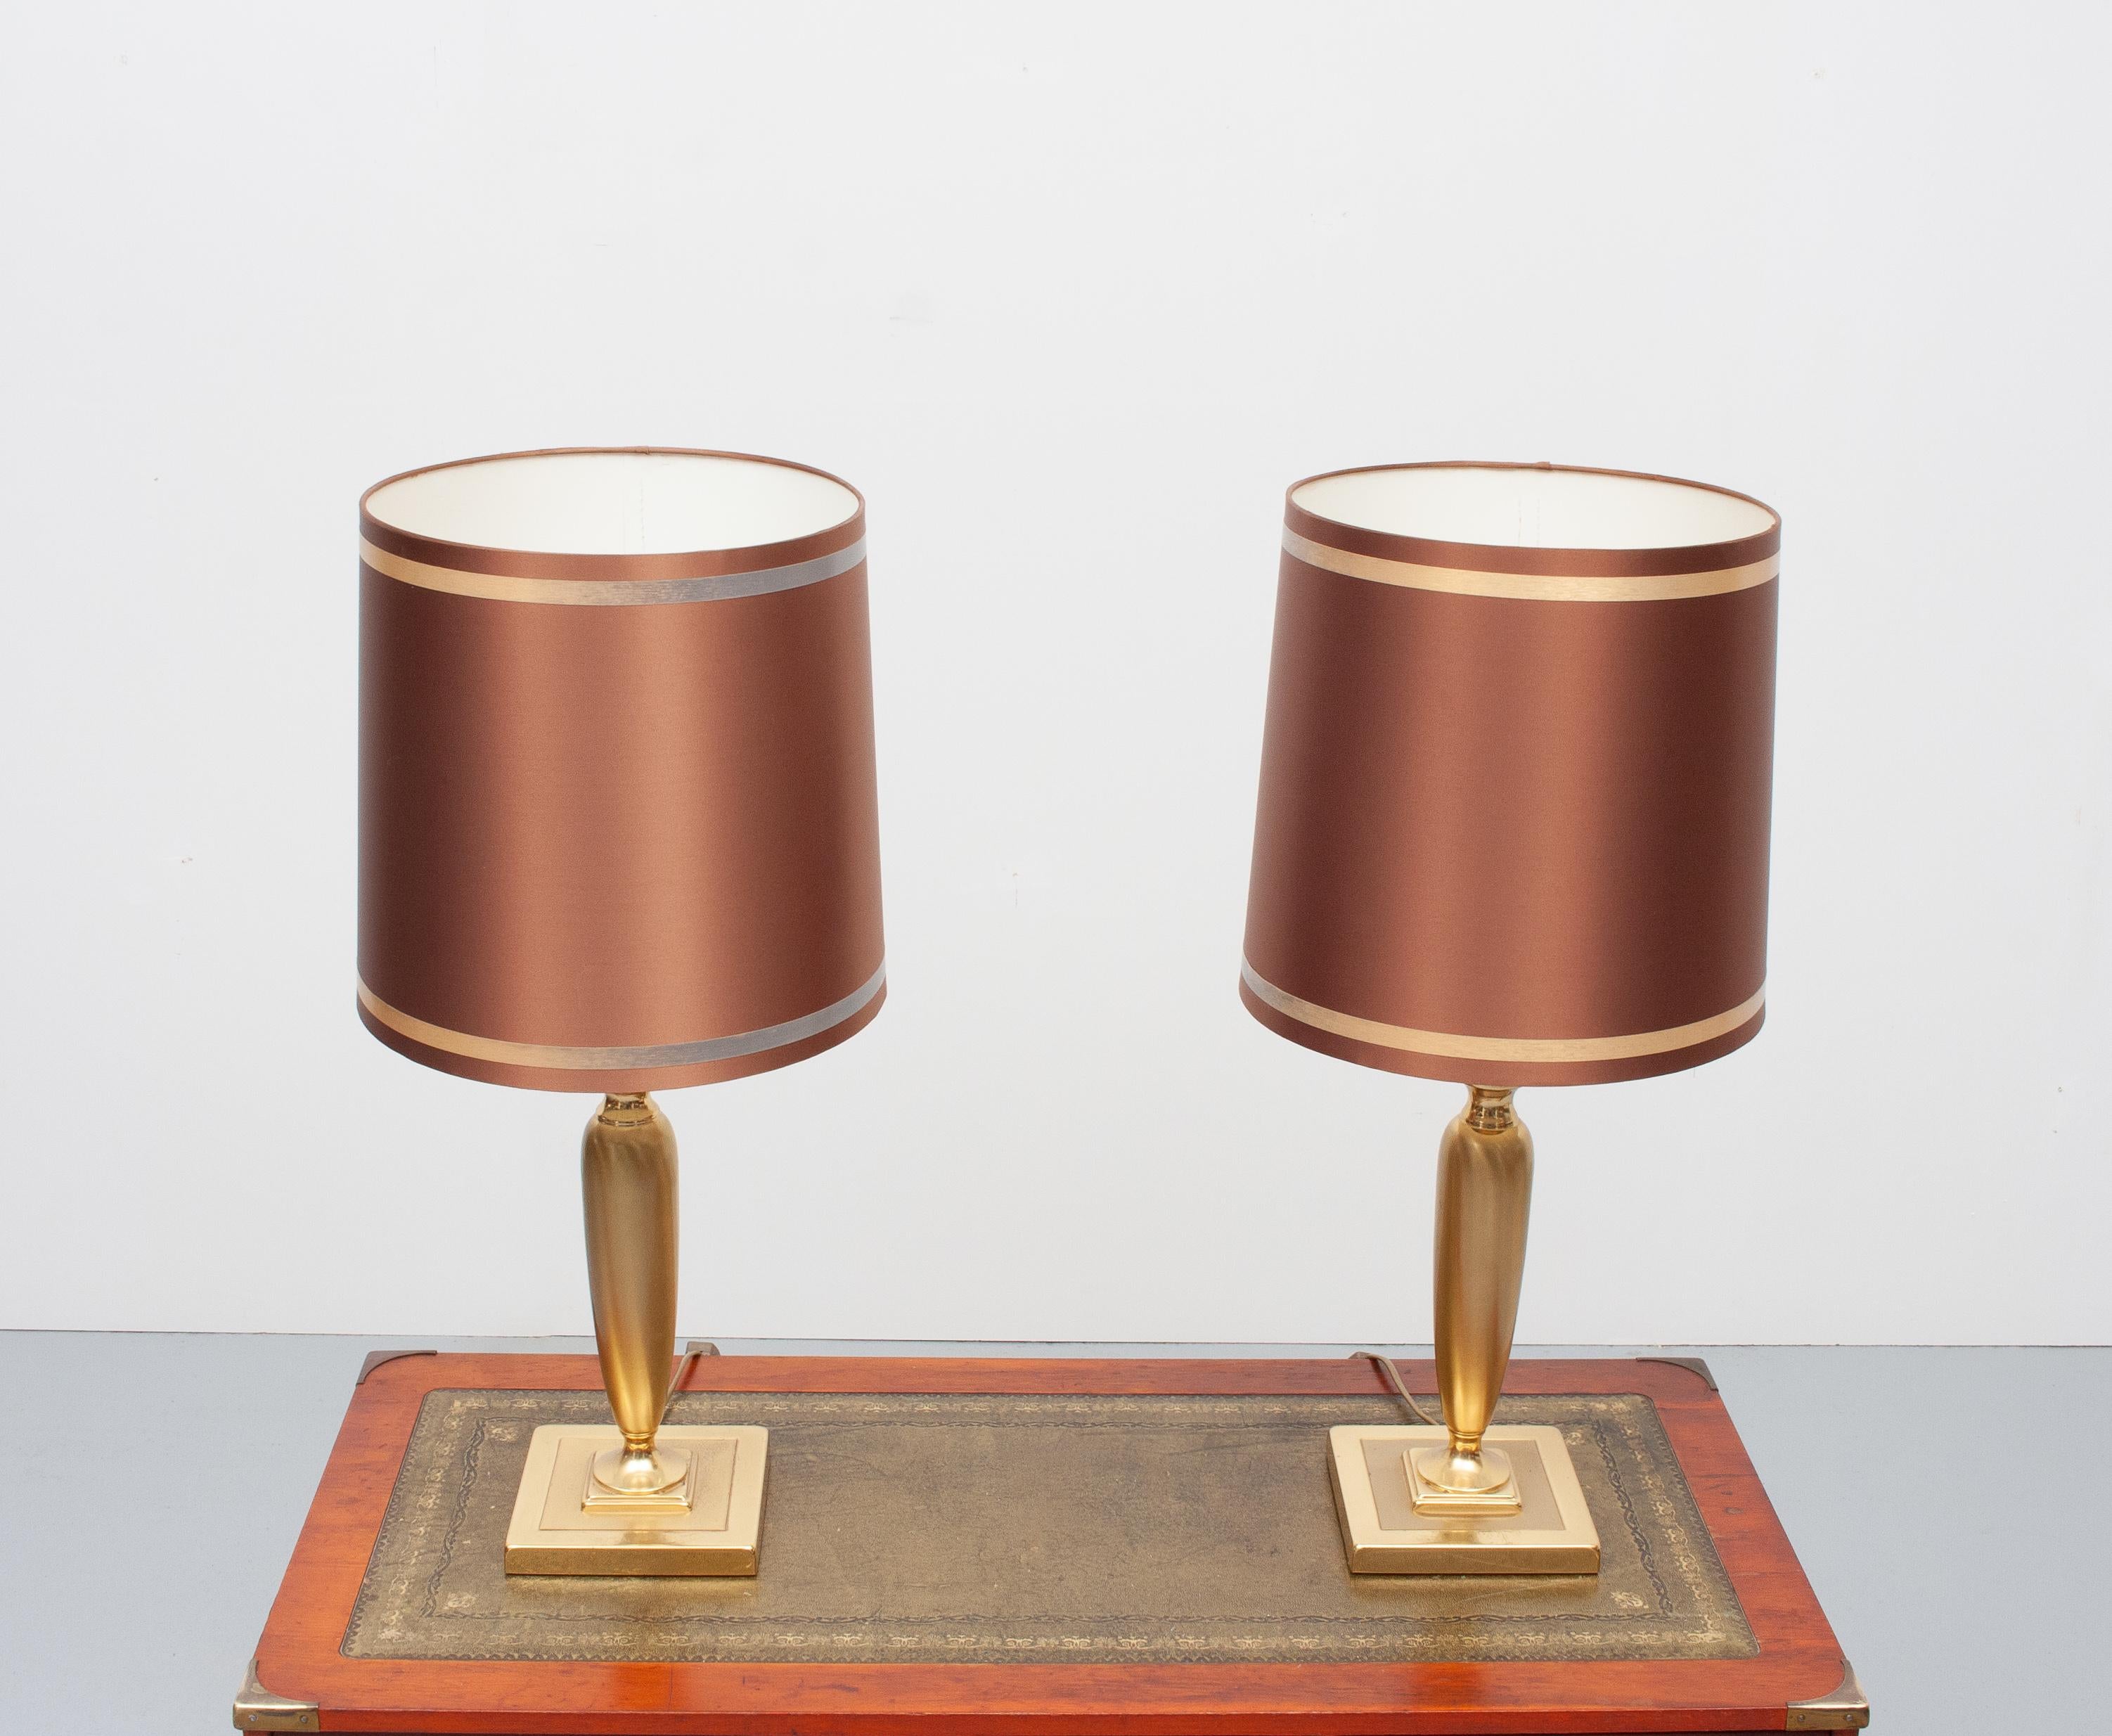 Very nice brass table lamps by Herda Holland 1970s comes with matching shades.
Good quality lamps. Good condition.